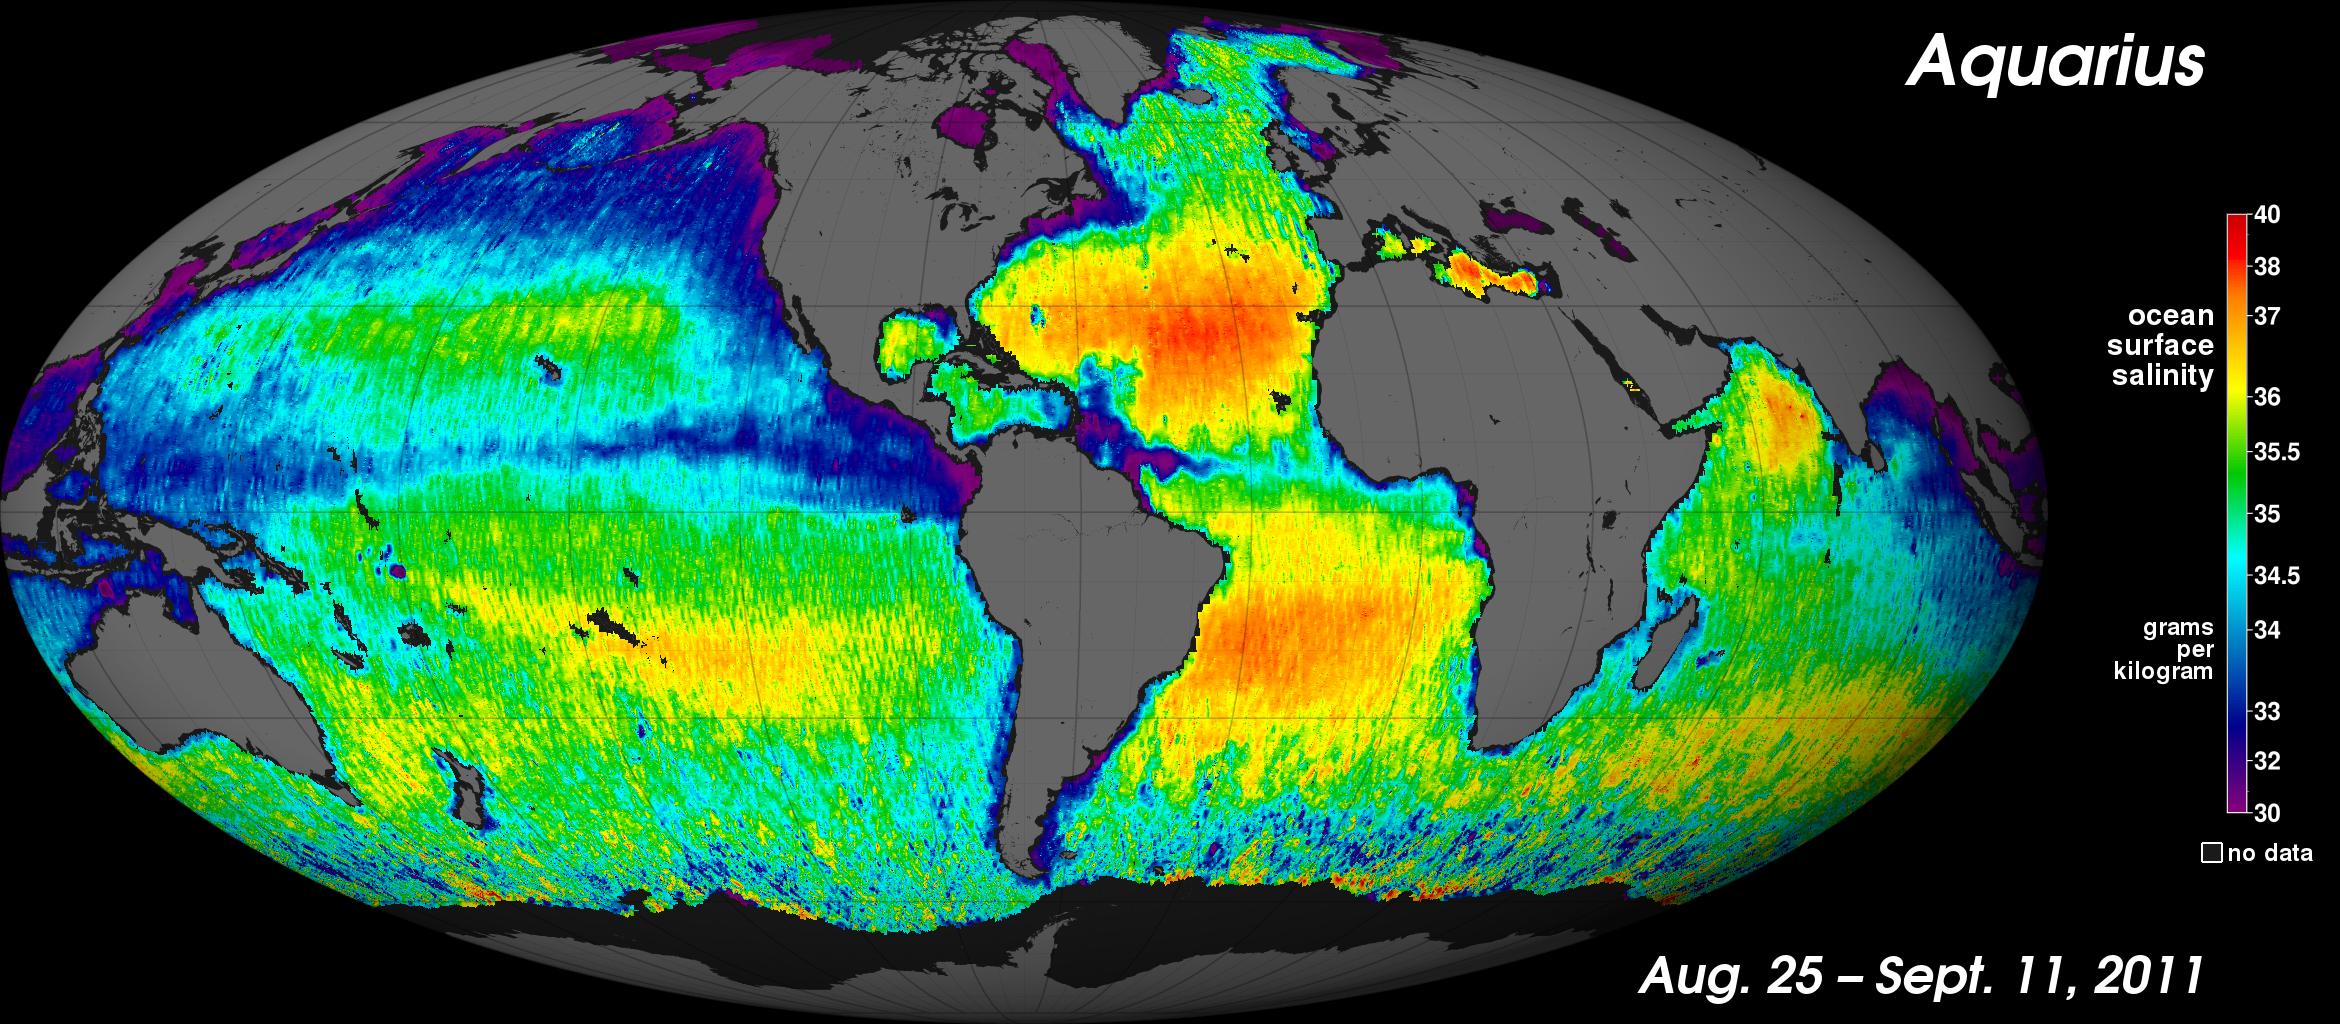 Map of global ocean salinity produced from only two and a half weeks of Aquarius data.